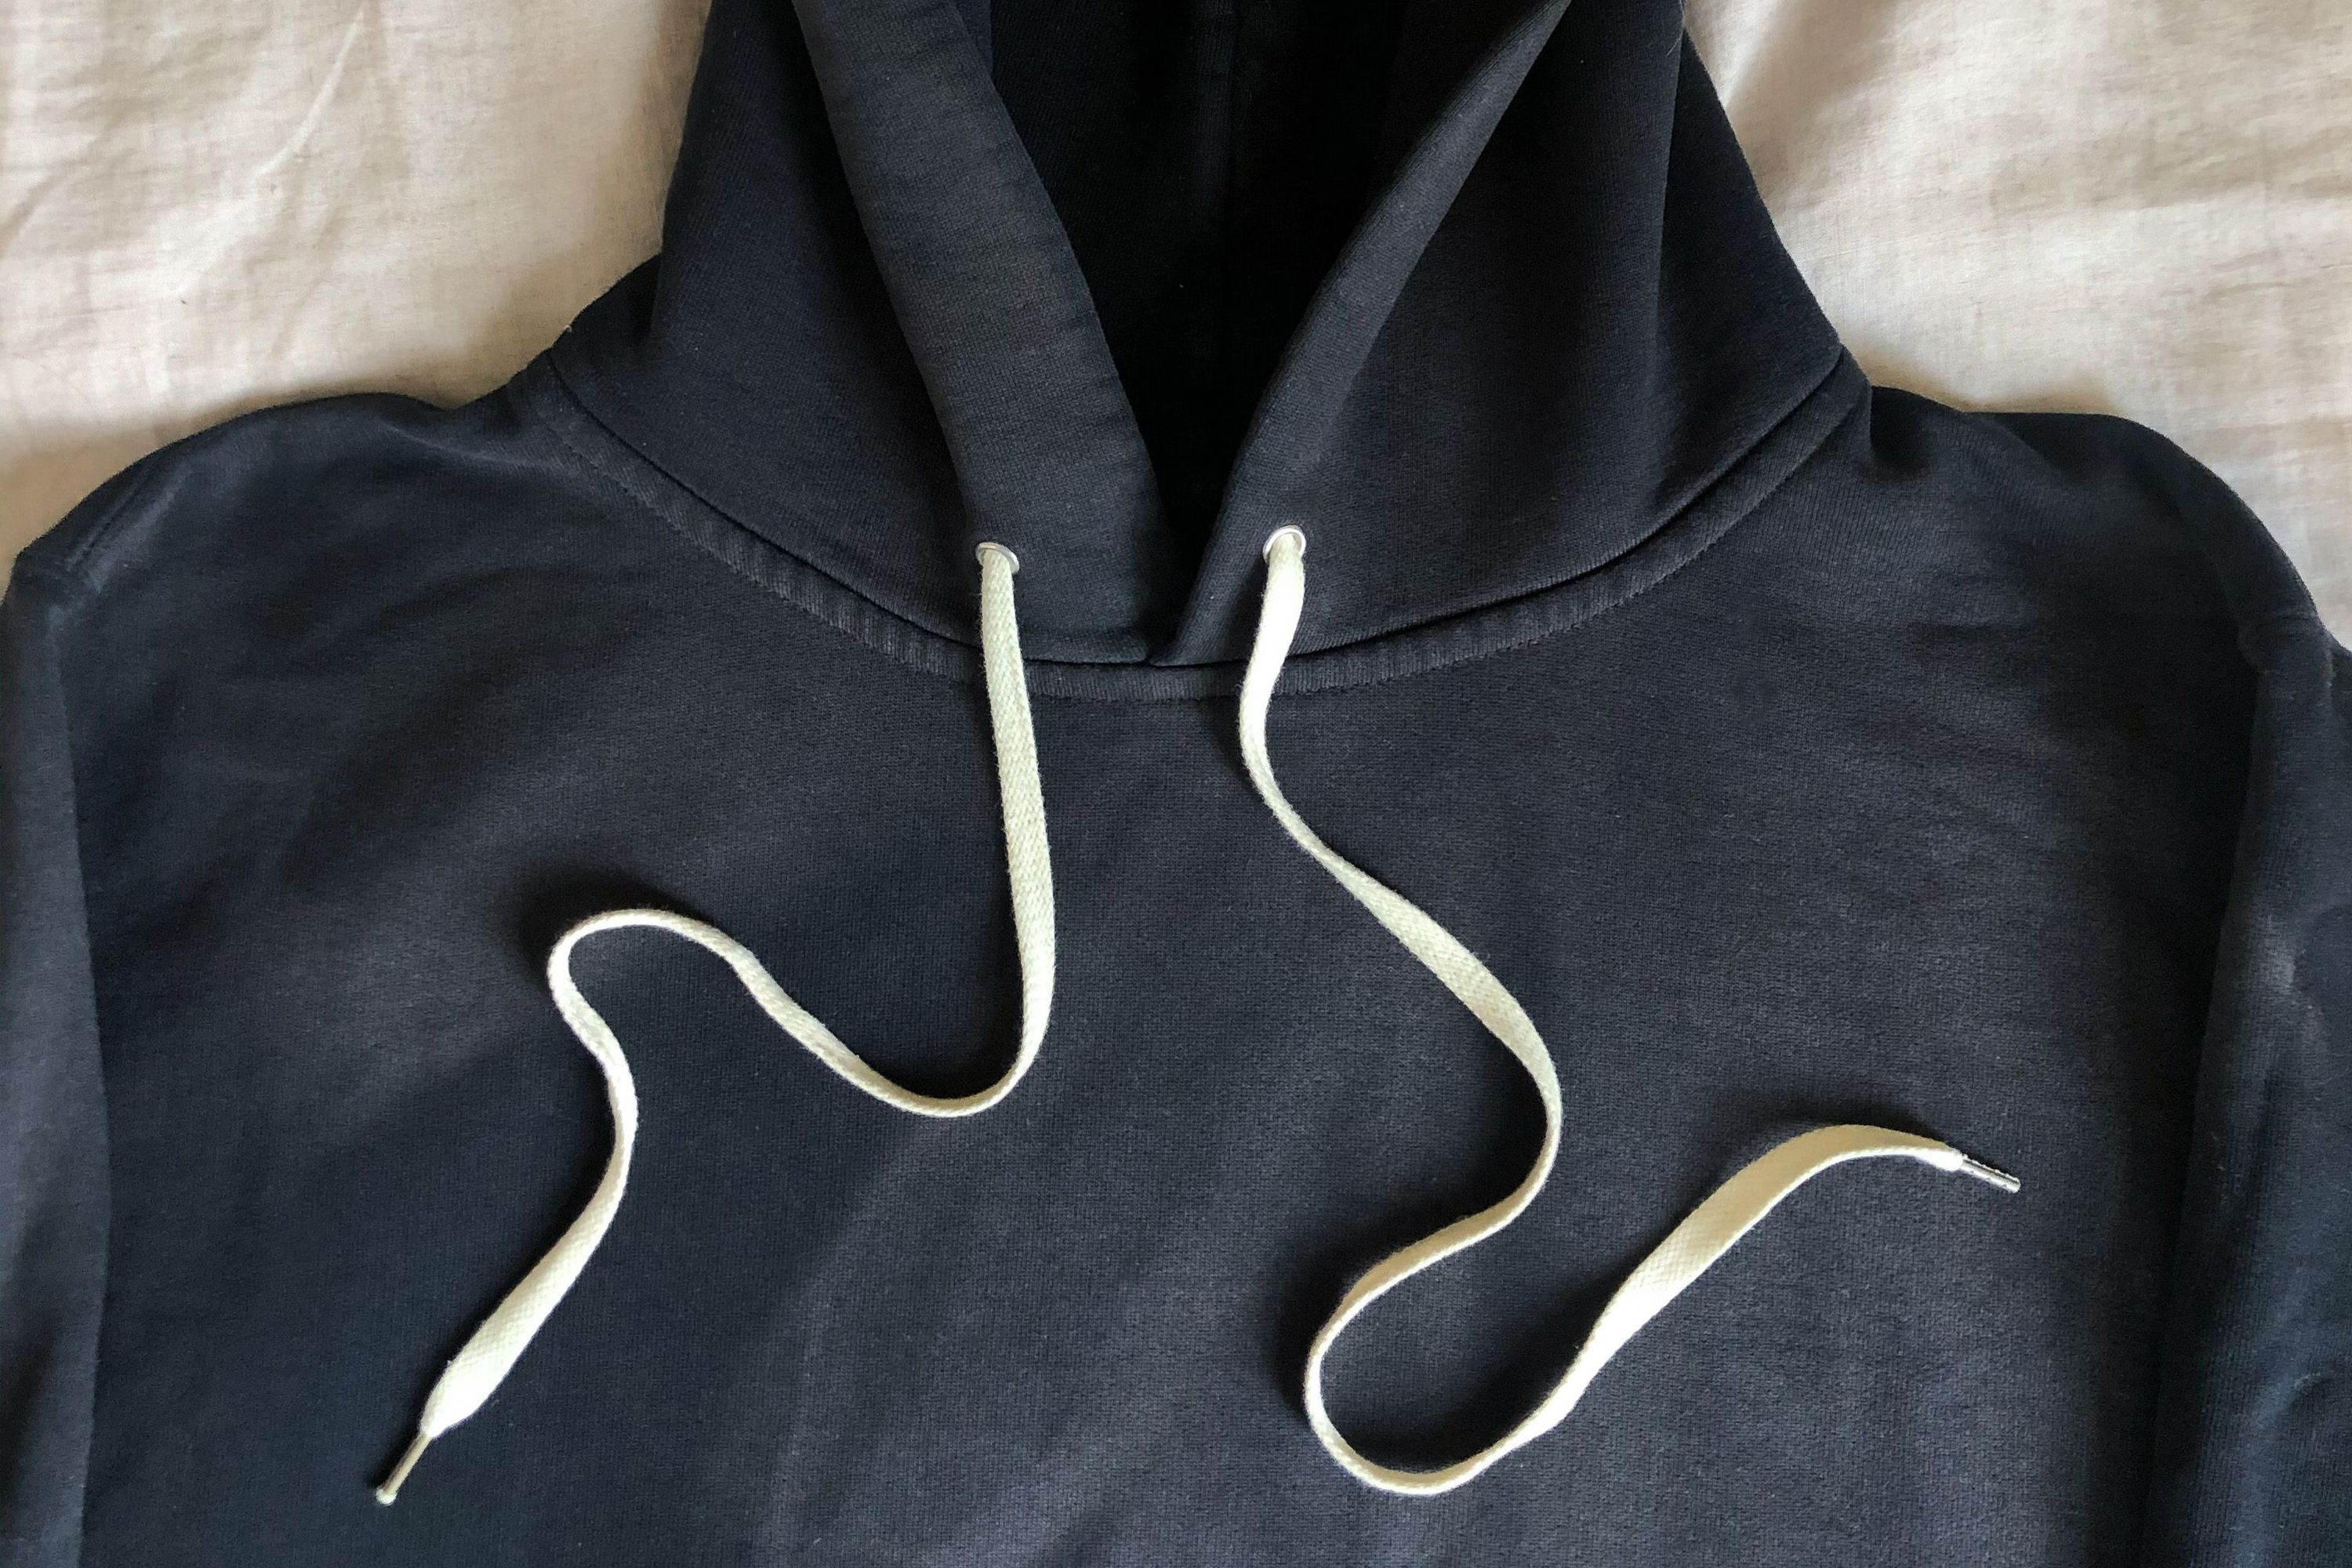 Is Your Hoodie Missing a Drawstring? Here's How to Fix It